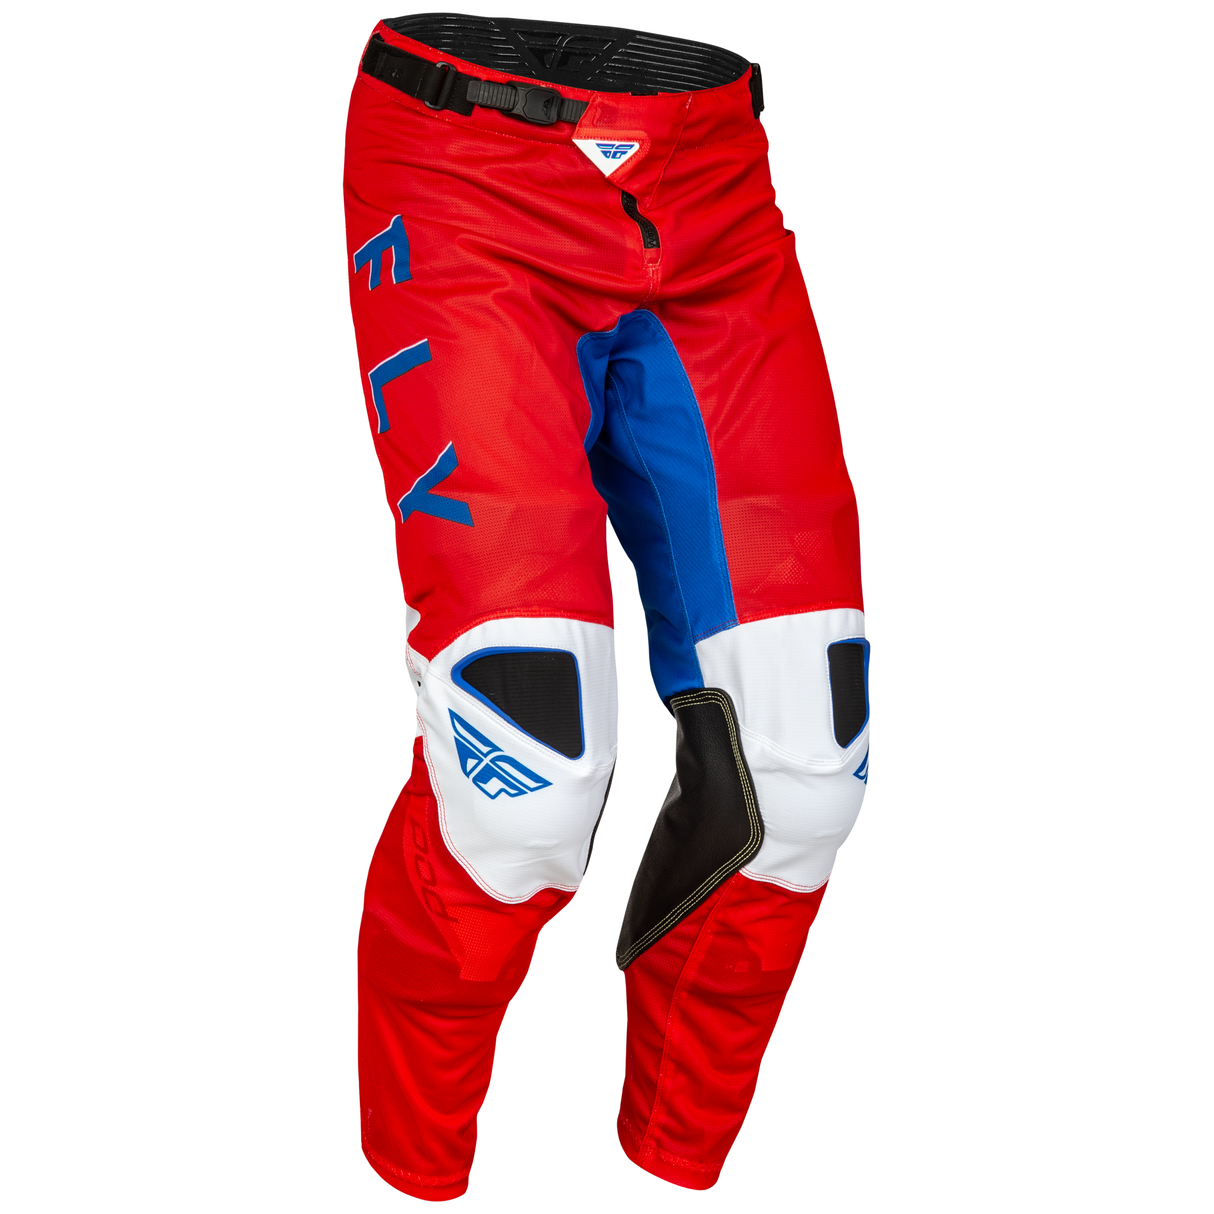 FLY RACING FLY KINETIC 2023.5 MESH S.E. KORE ADULT S (RED/WHITE/BLUE) SIZE 28RED WHITE BLUE PANTS